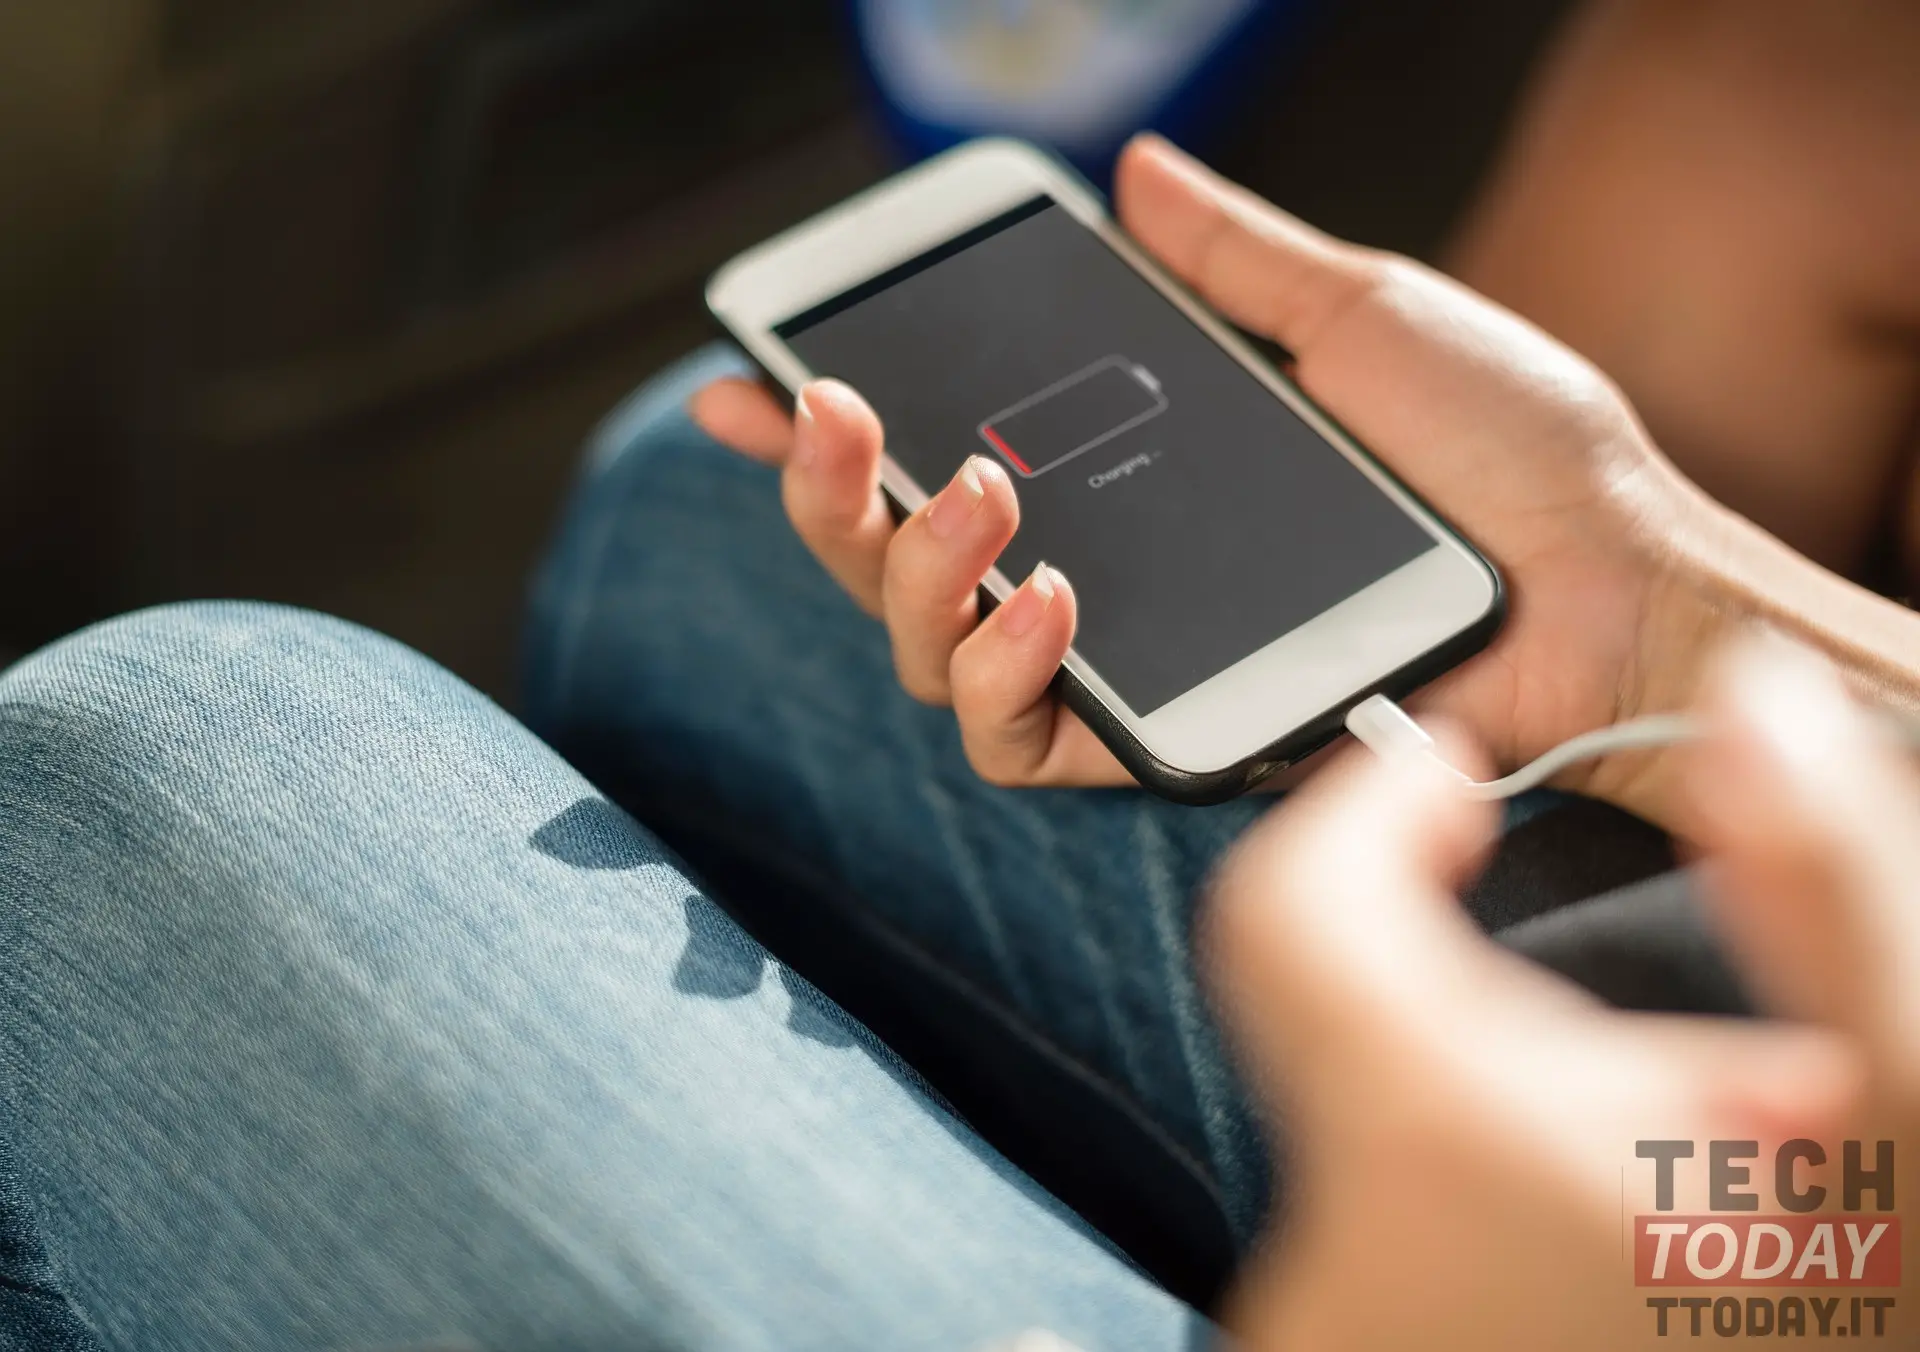 New material allows you to recharge your smartphone 10 times faster